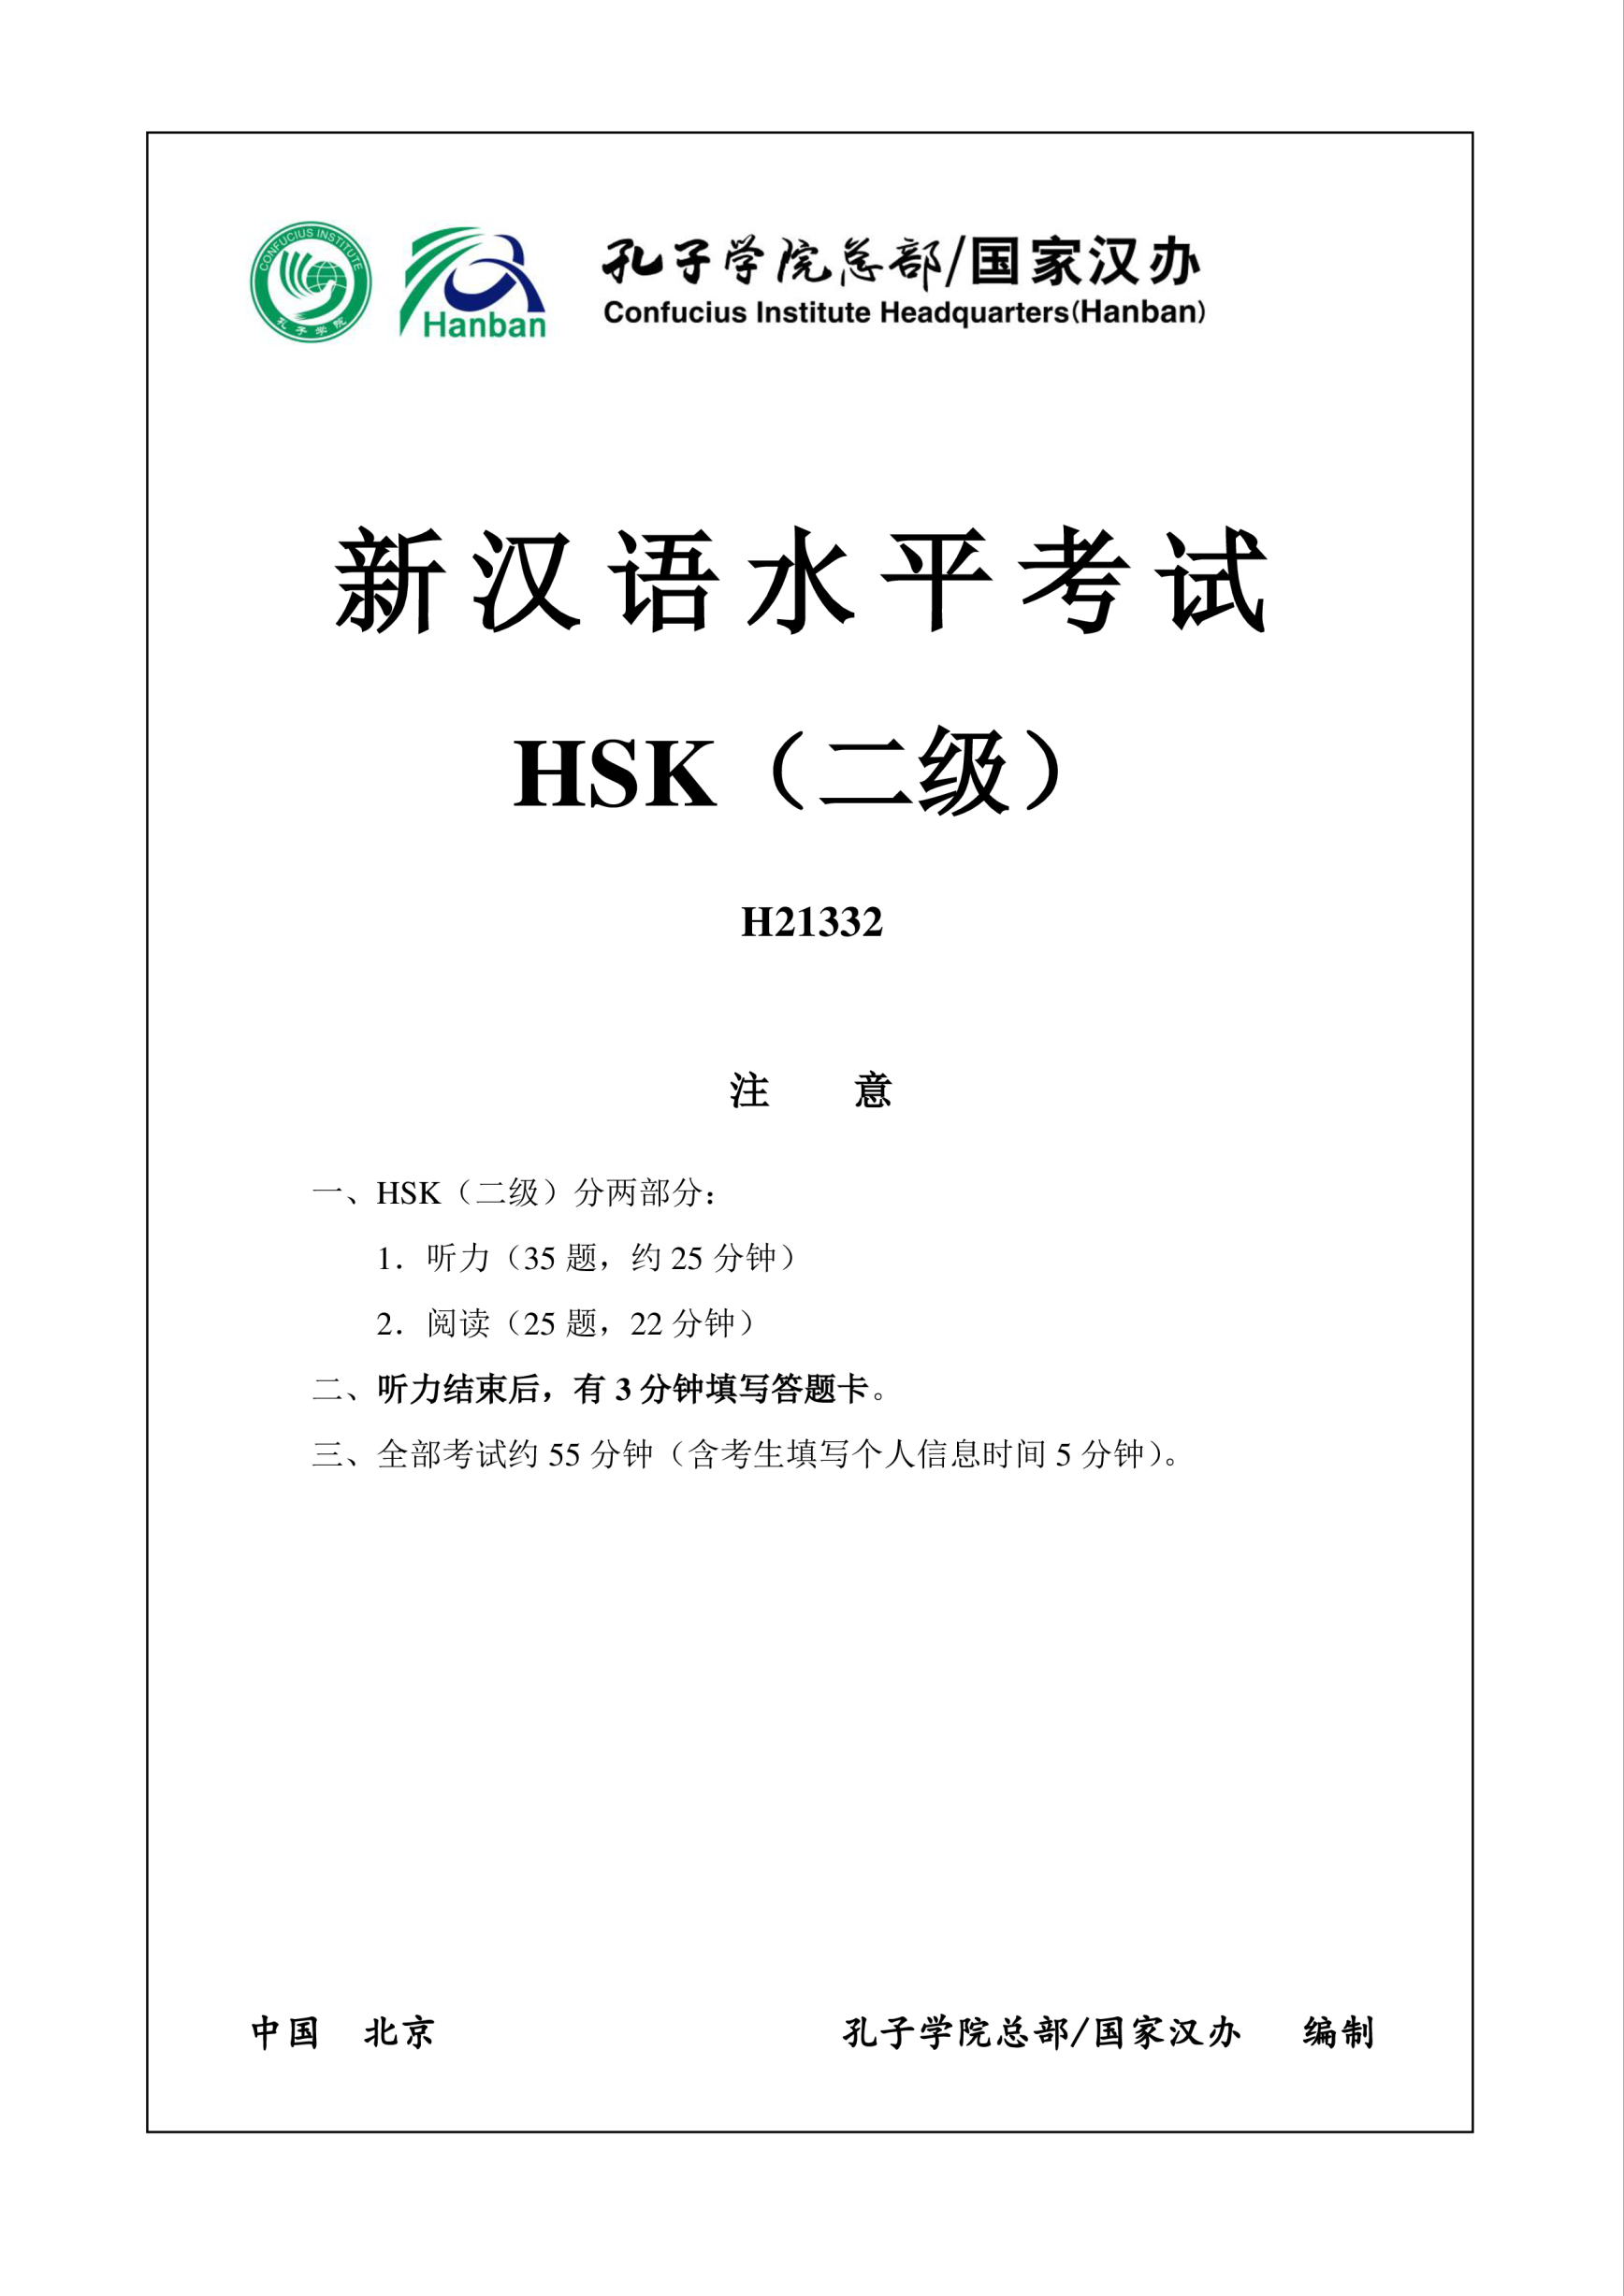 template topic preview image HSK2 Chinese Exam including Answers # HSK2 H21332